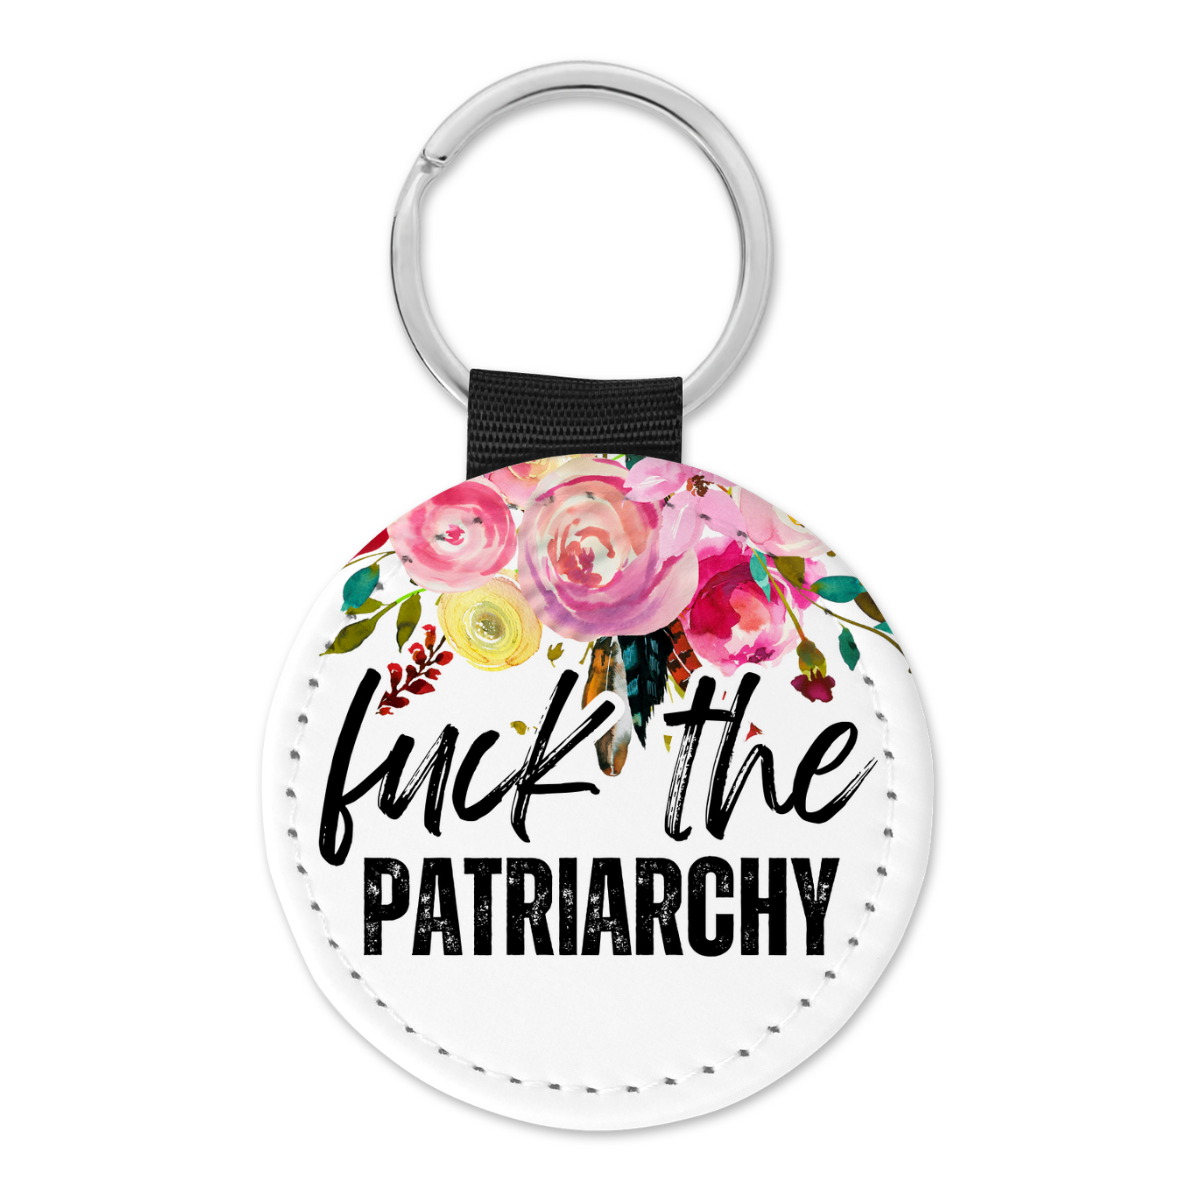 Fuck The Patriarchy | Keyring - The Pretty Things.ca